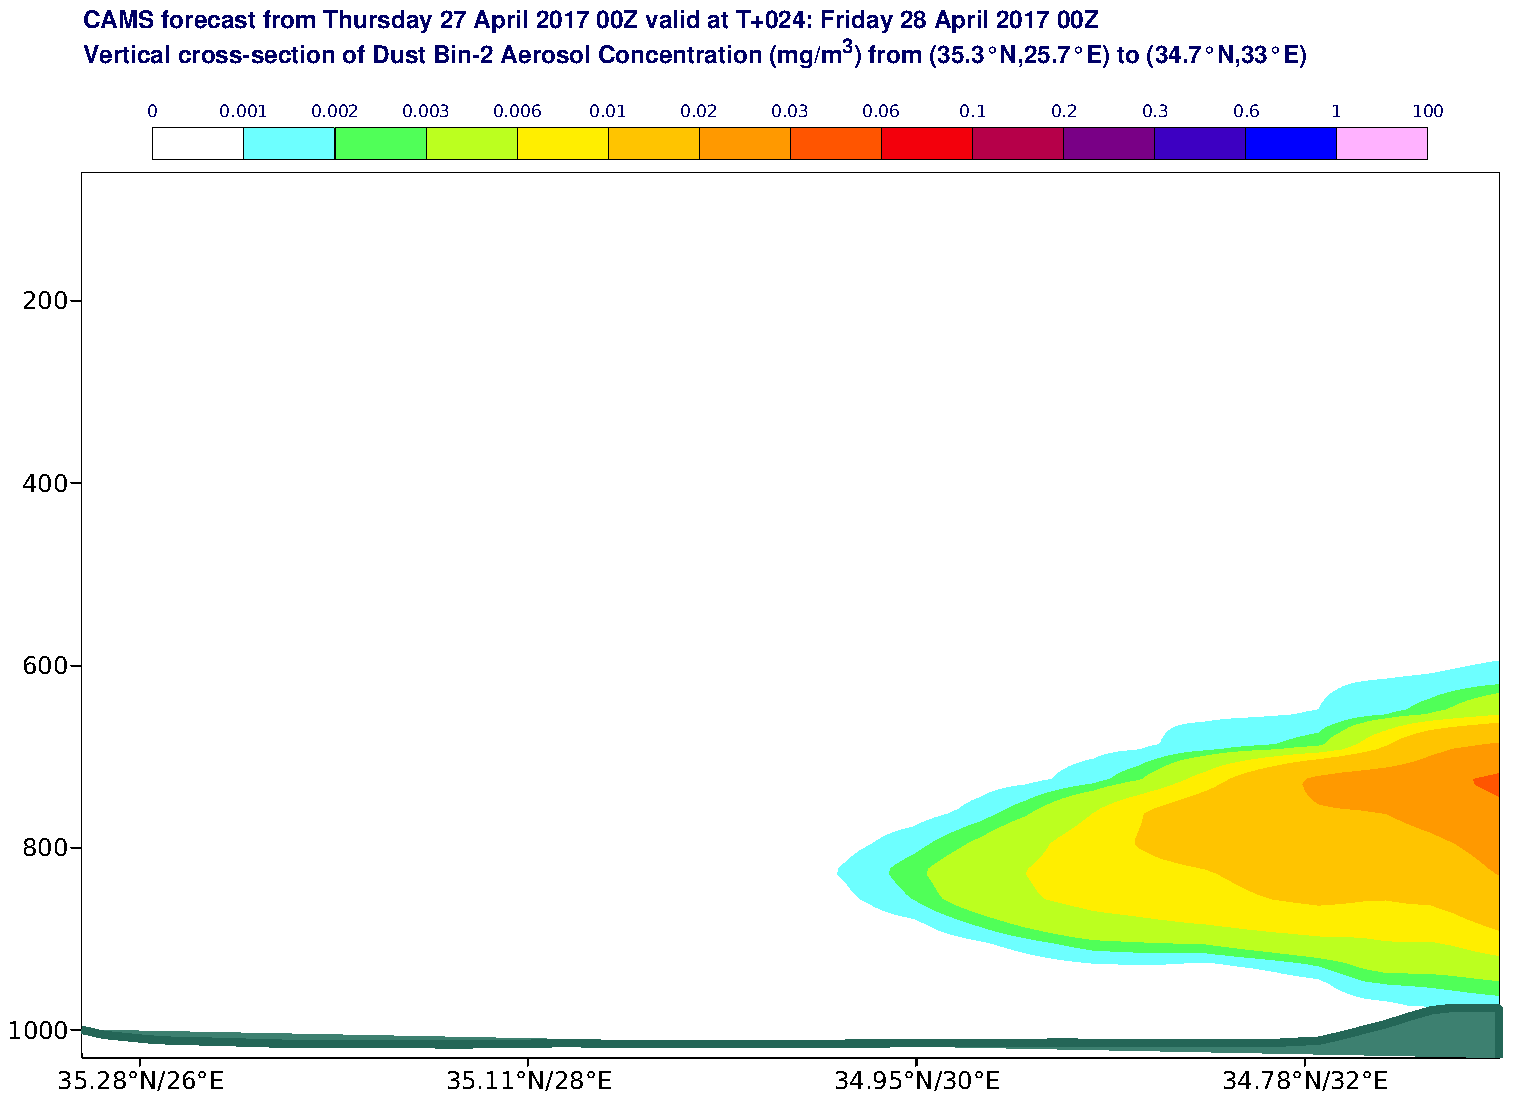 Vertical cross-section of Dust Bin-2 Aerosol Concentration (mg/m3) valid at T24 - 2017-04-28 00:00